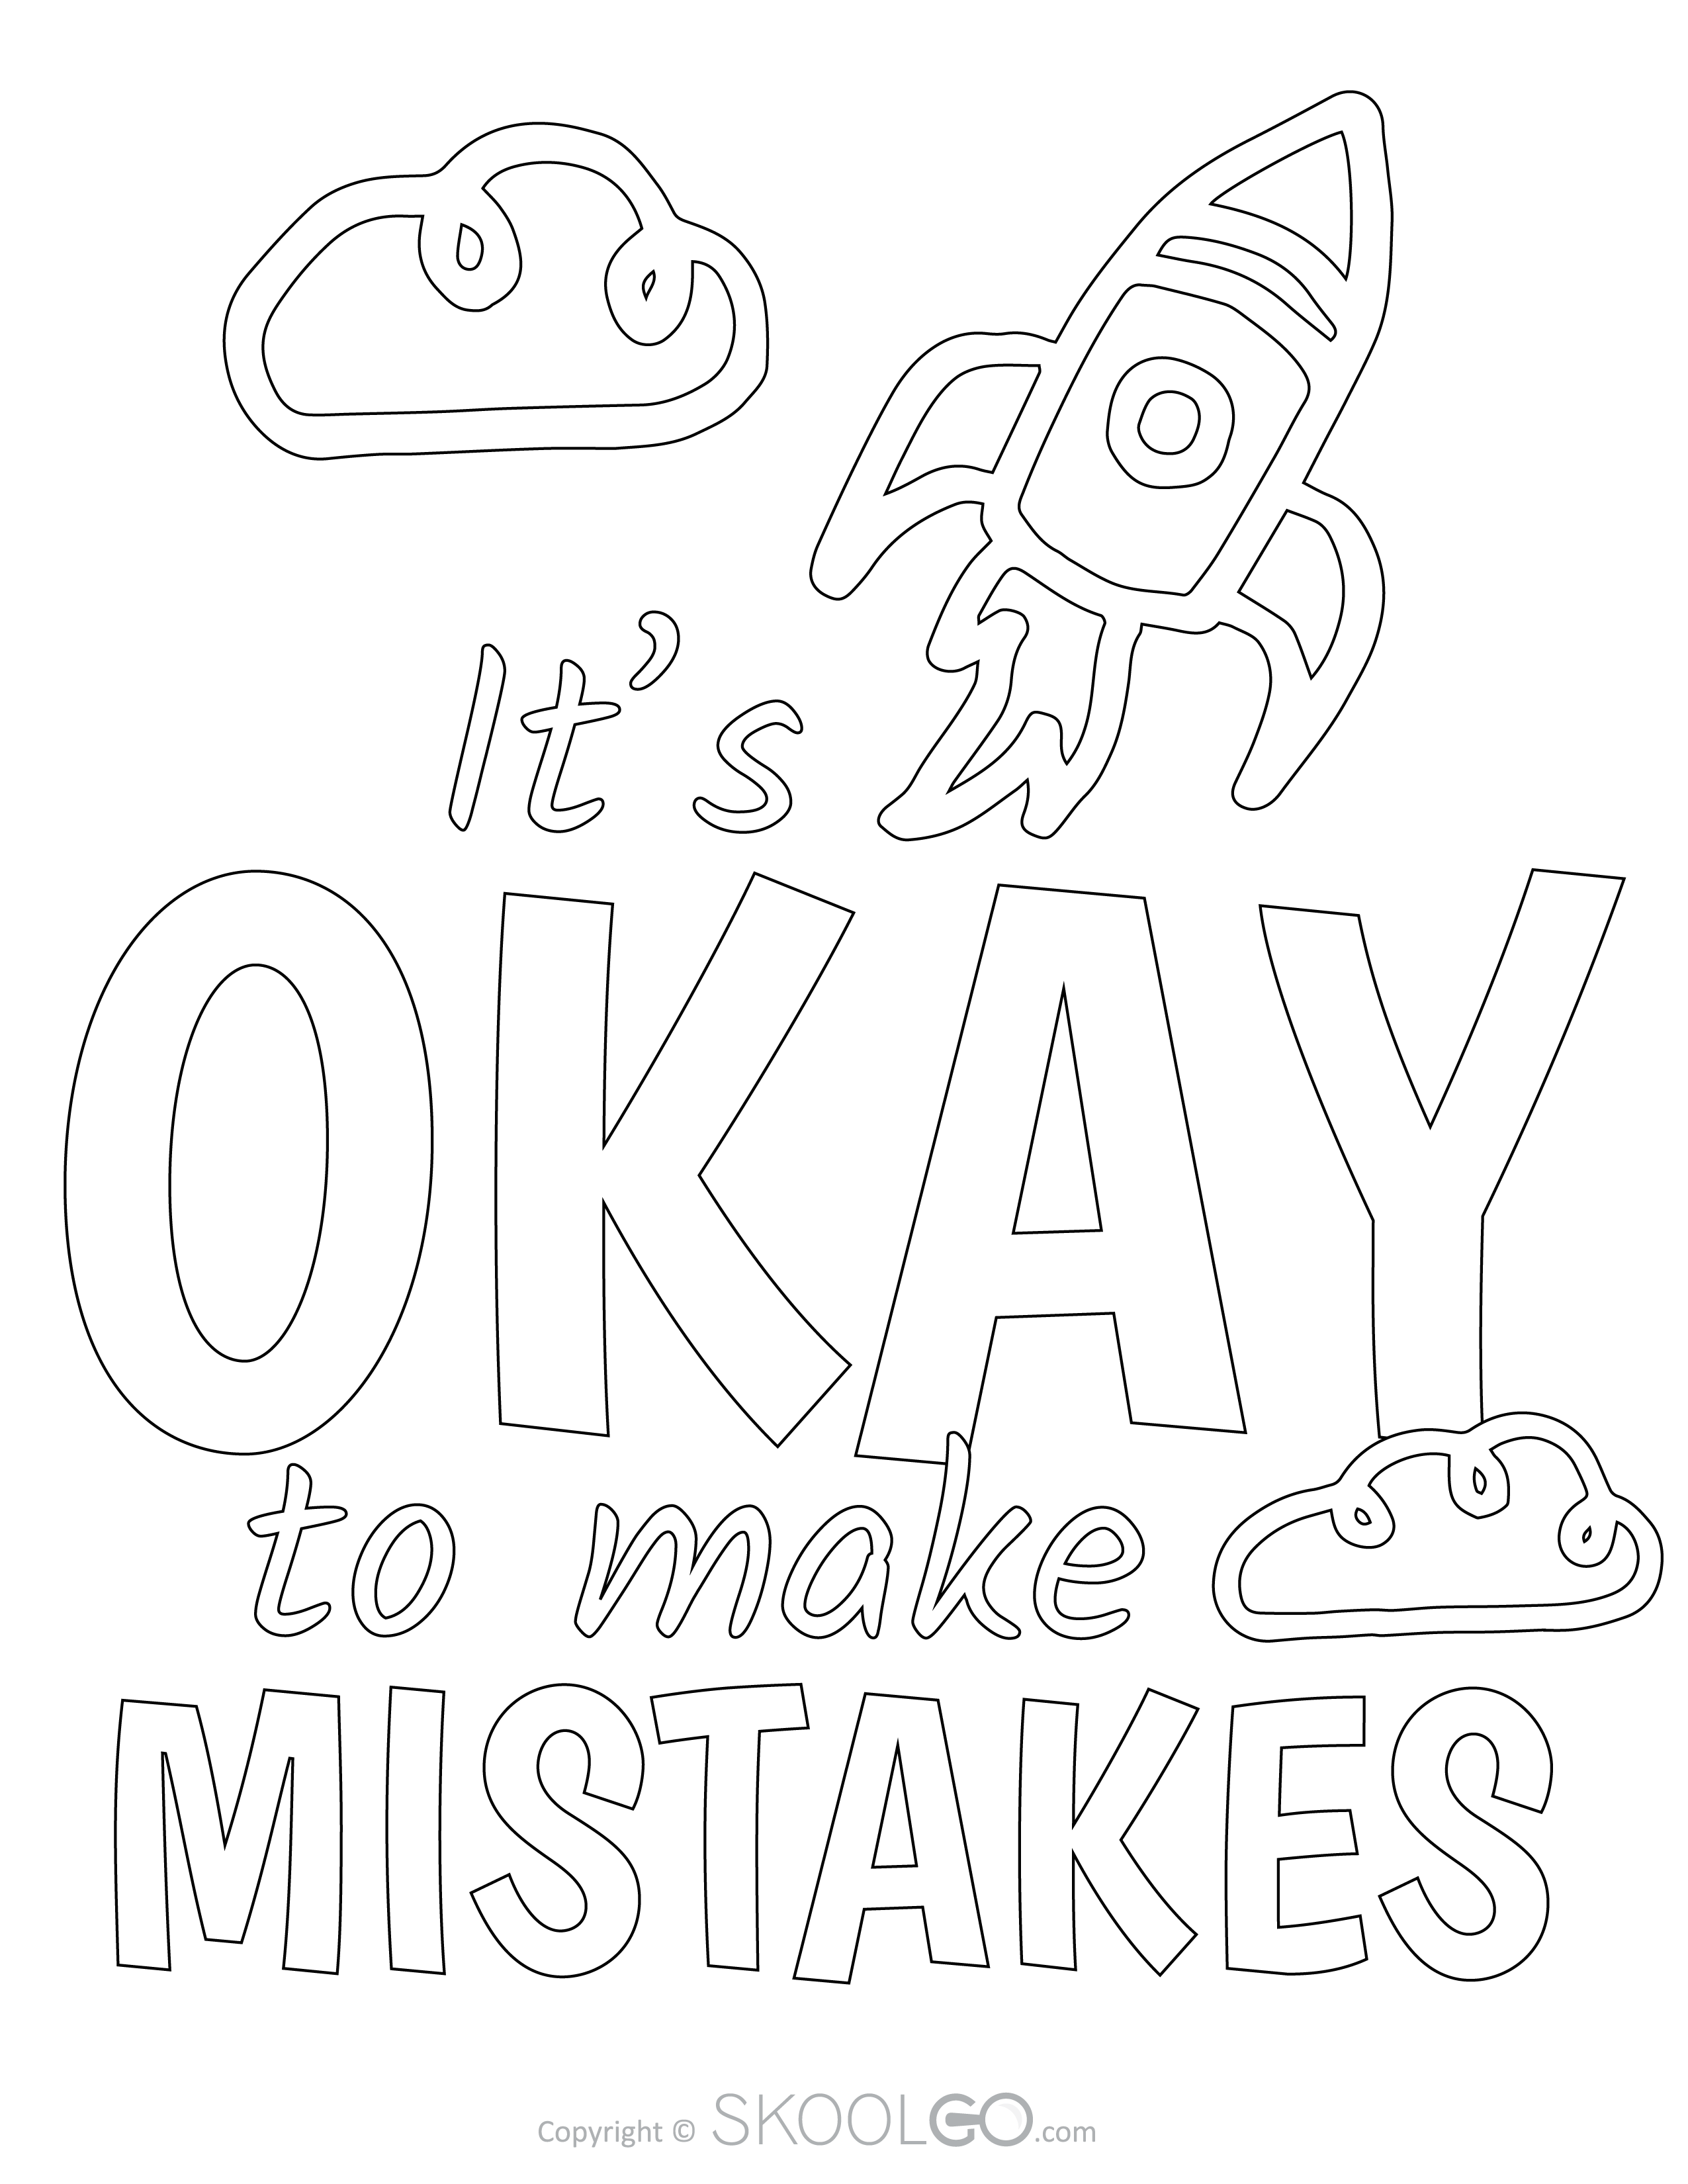 It Is Okay To Make Mistakes - Free Classroom Poster Coloring Version